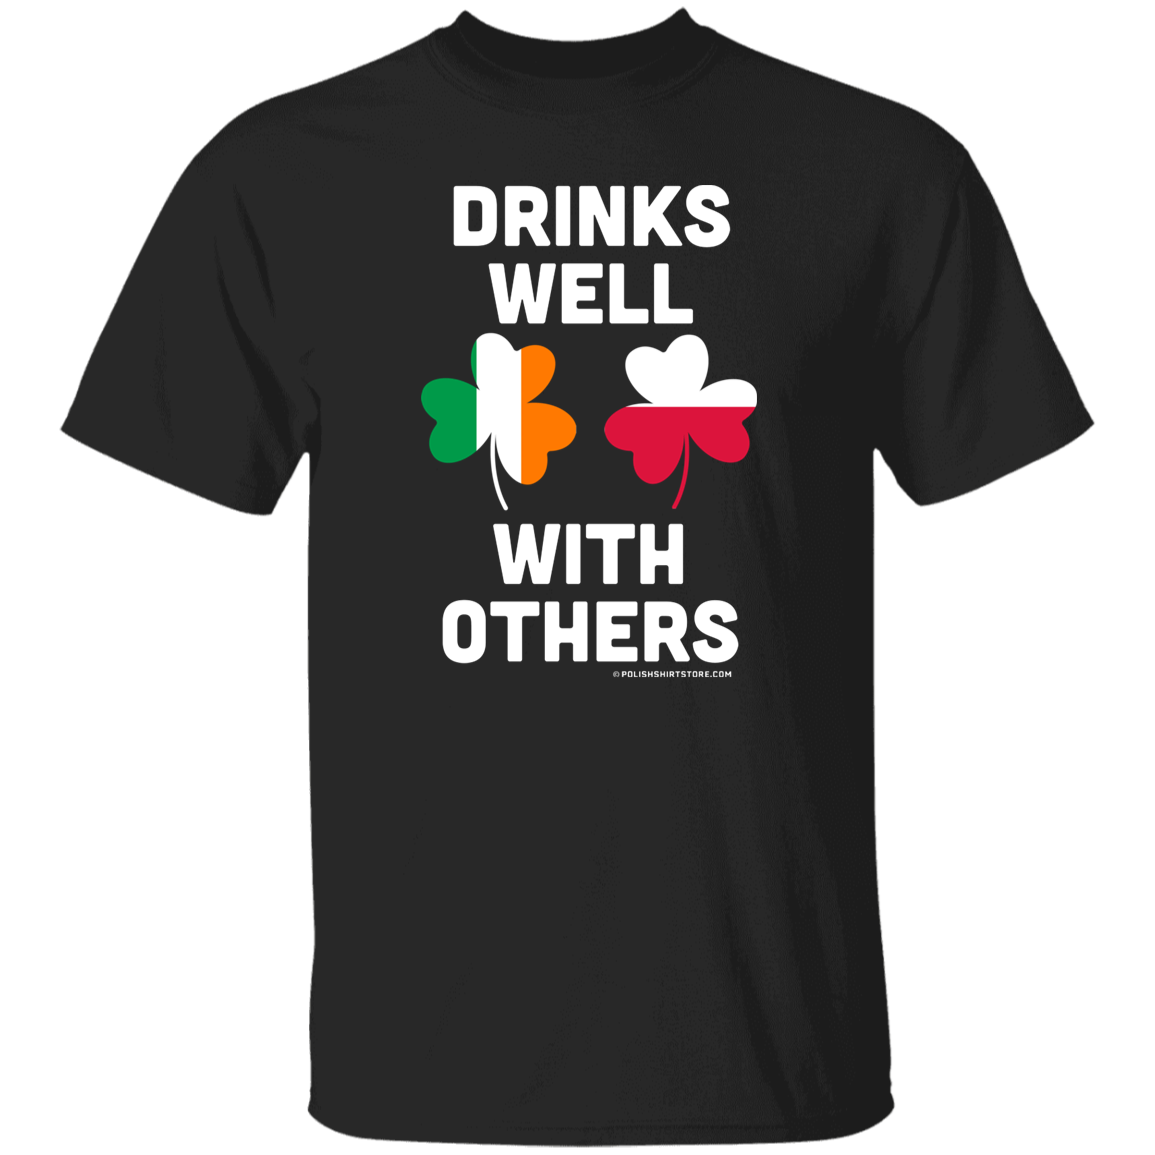 Drinks Well With Others Apparel CustomCat G500 5.3 oz. T-Shirt Black S